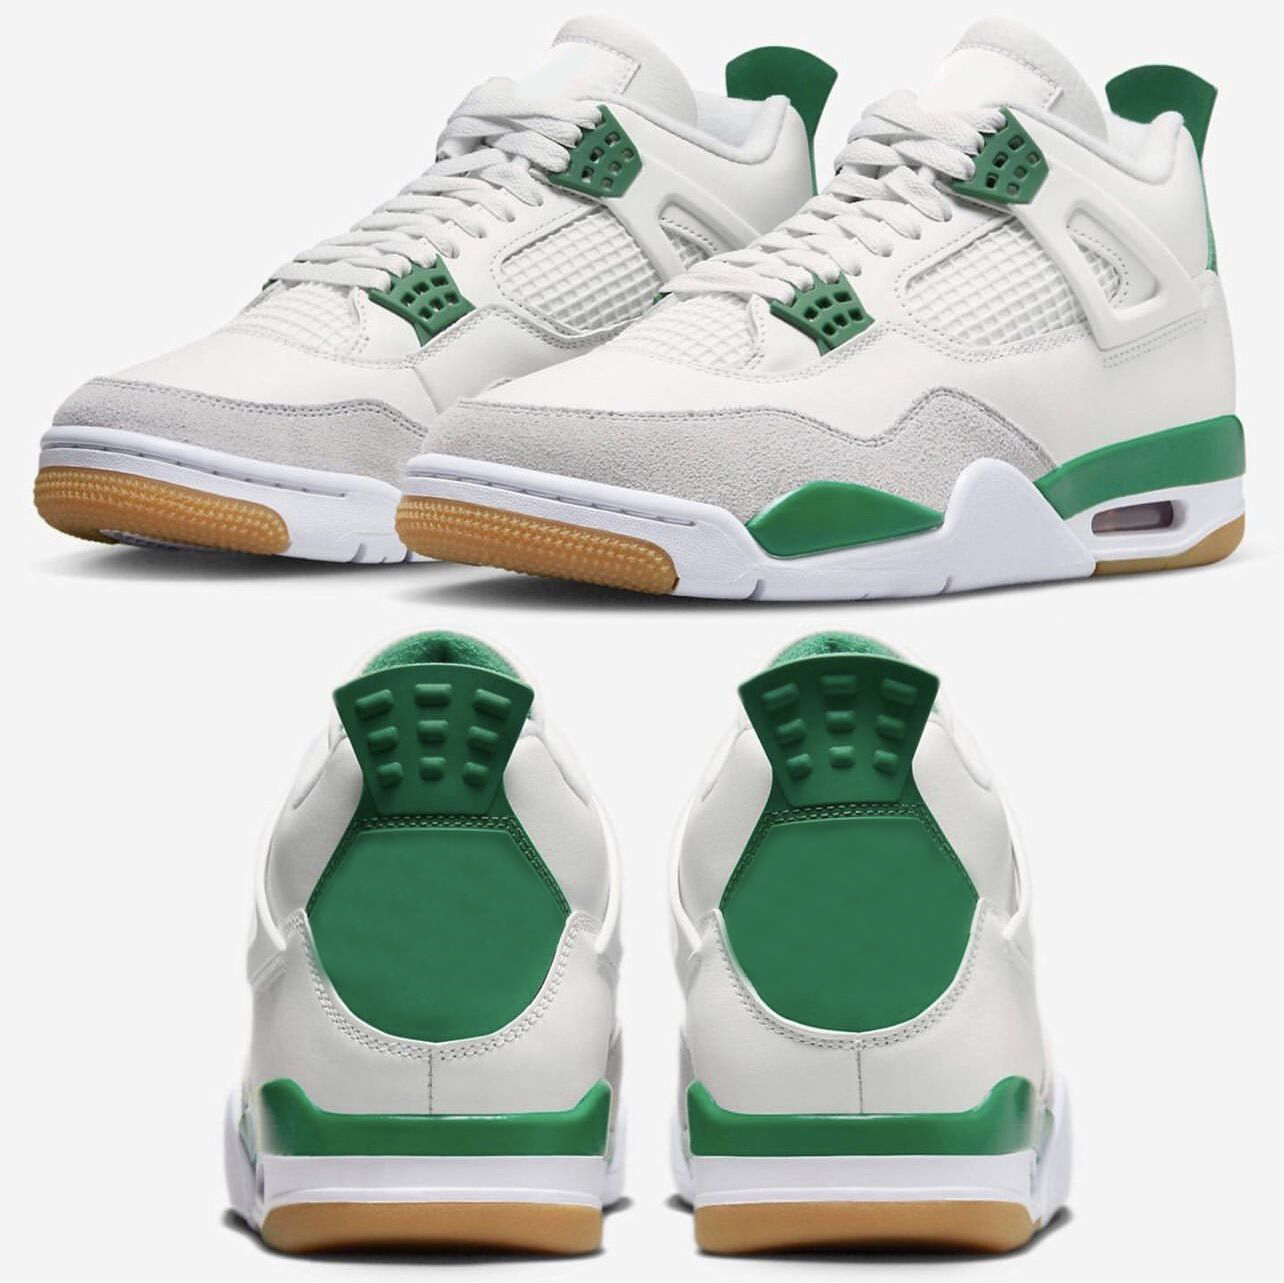 

Authentic SB x 4 Pine Green Shoes White Leather Neutral Grey Suede Men Basketball Sports Sneakers With Original box DR5415-103 Size US7-13